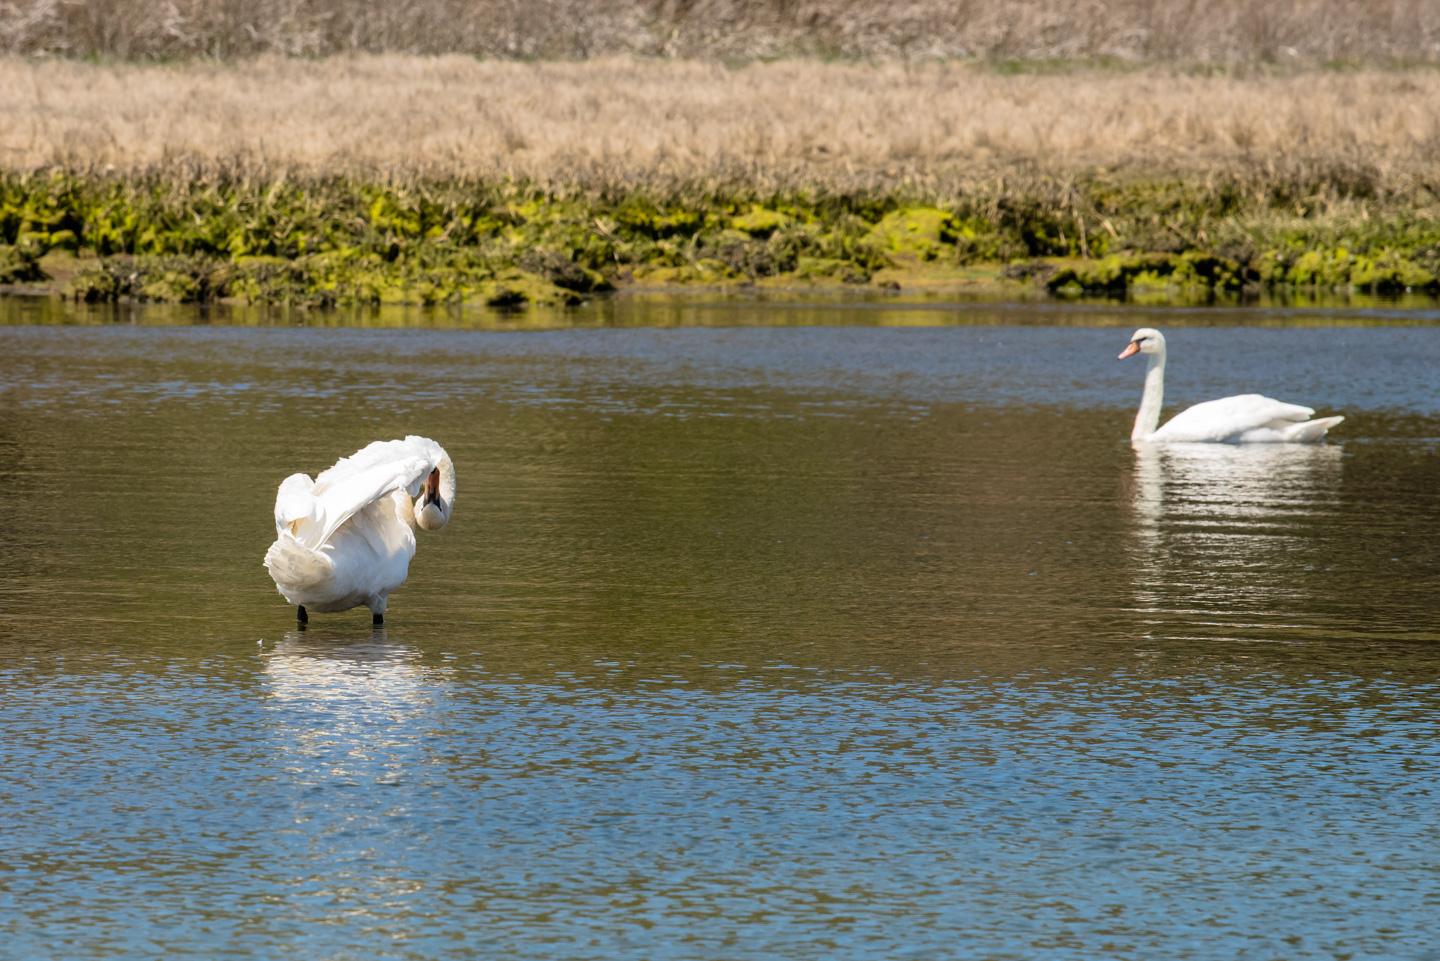 One Mute Swan grooming and another swimming by